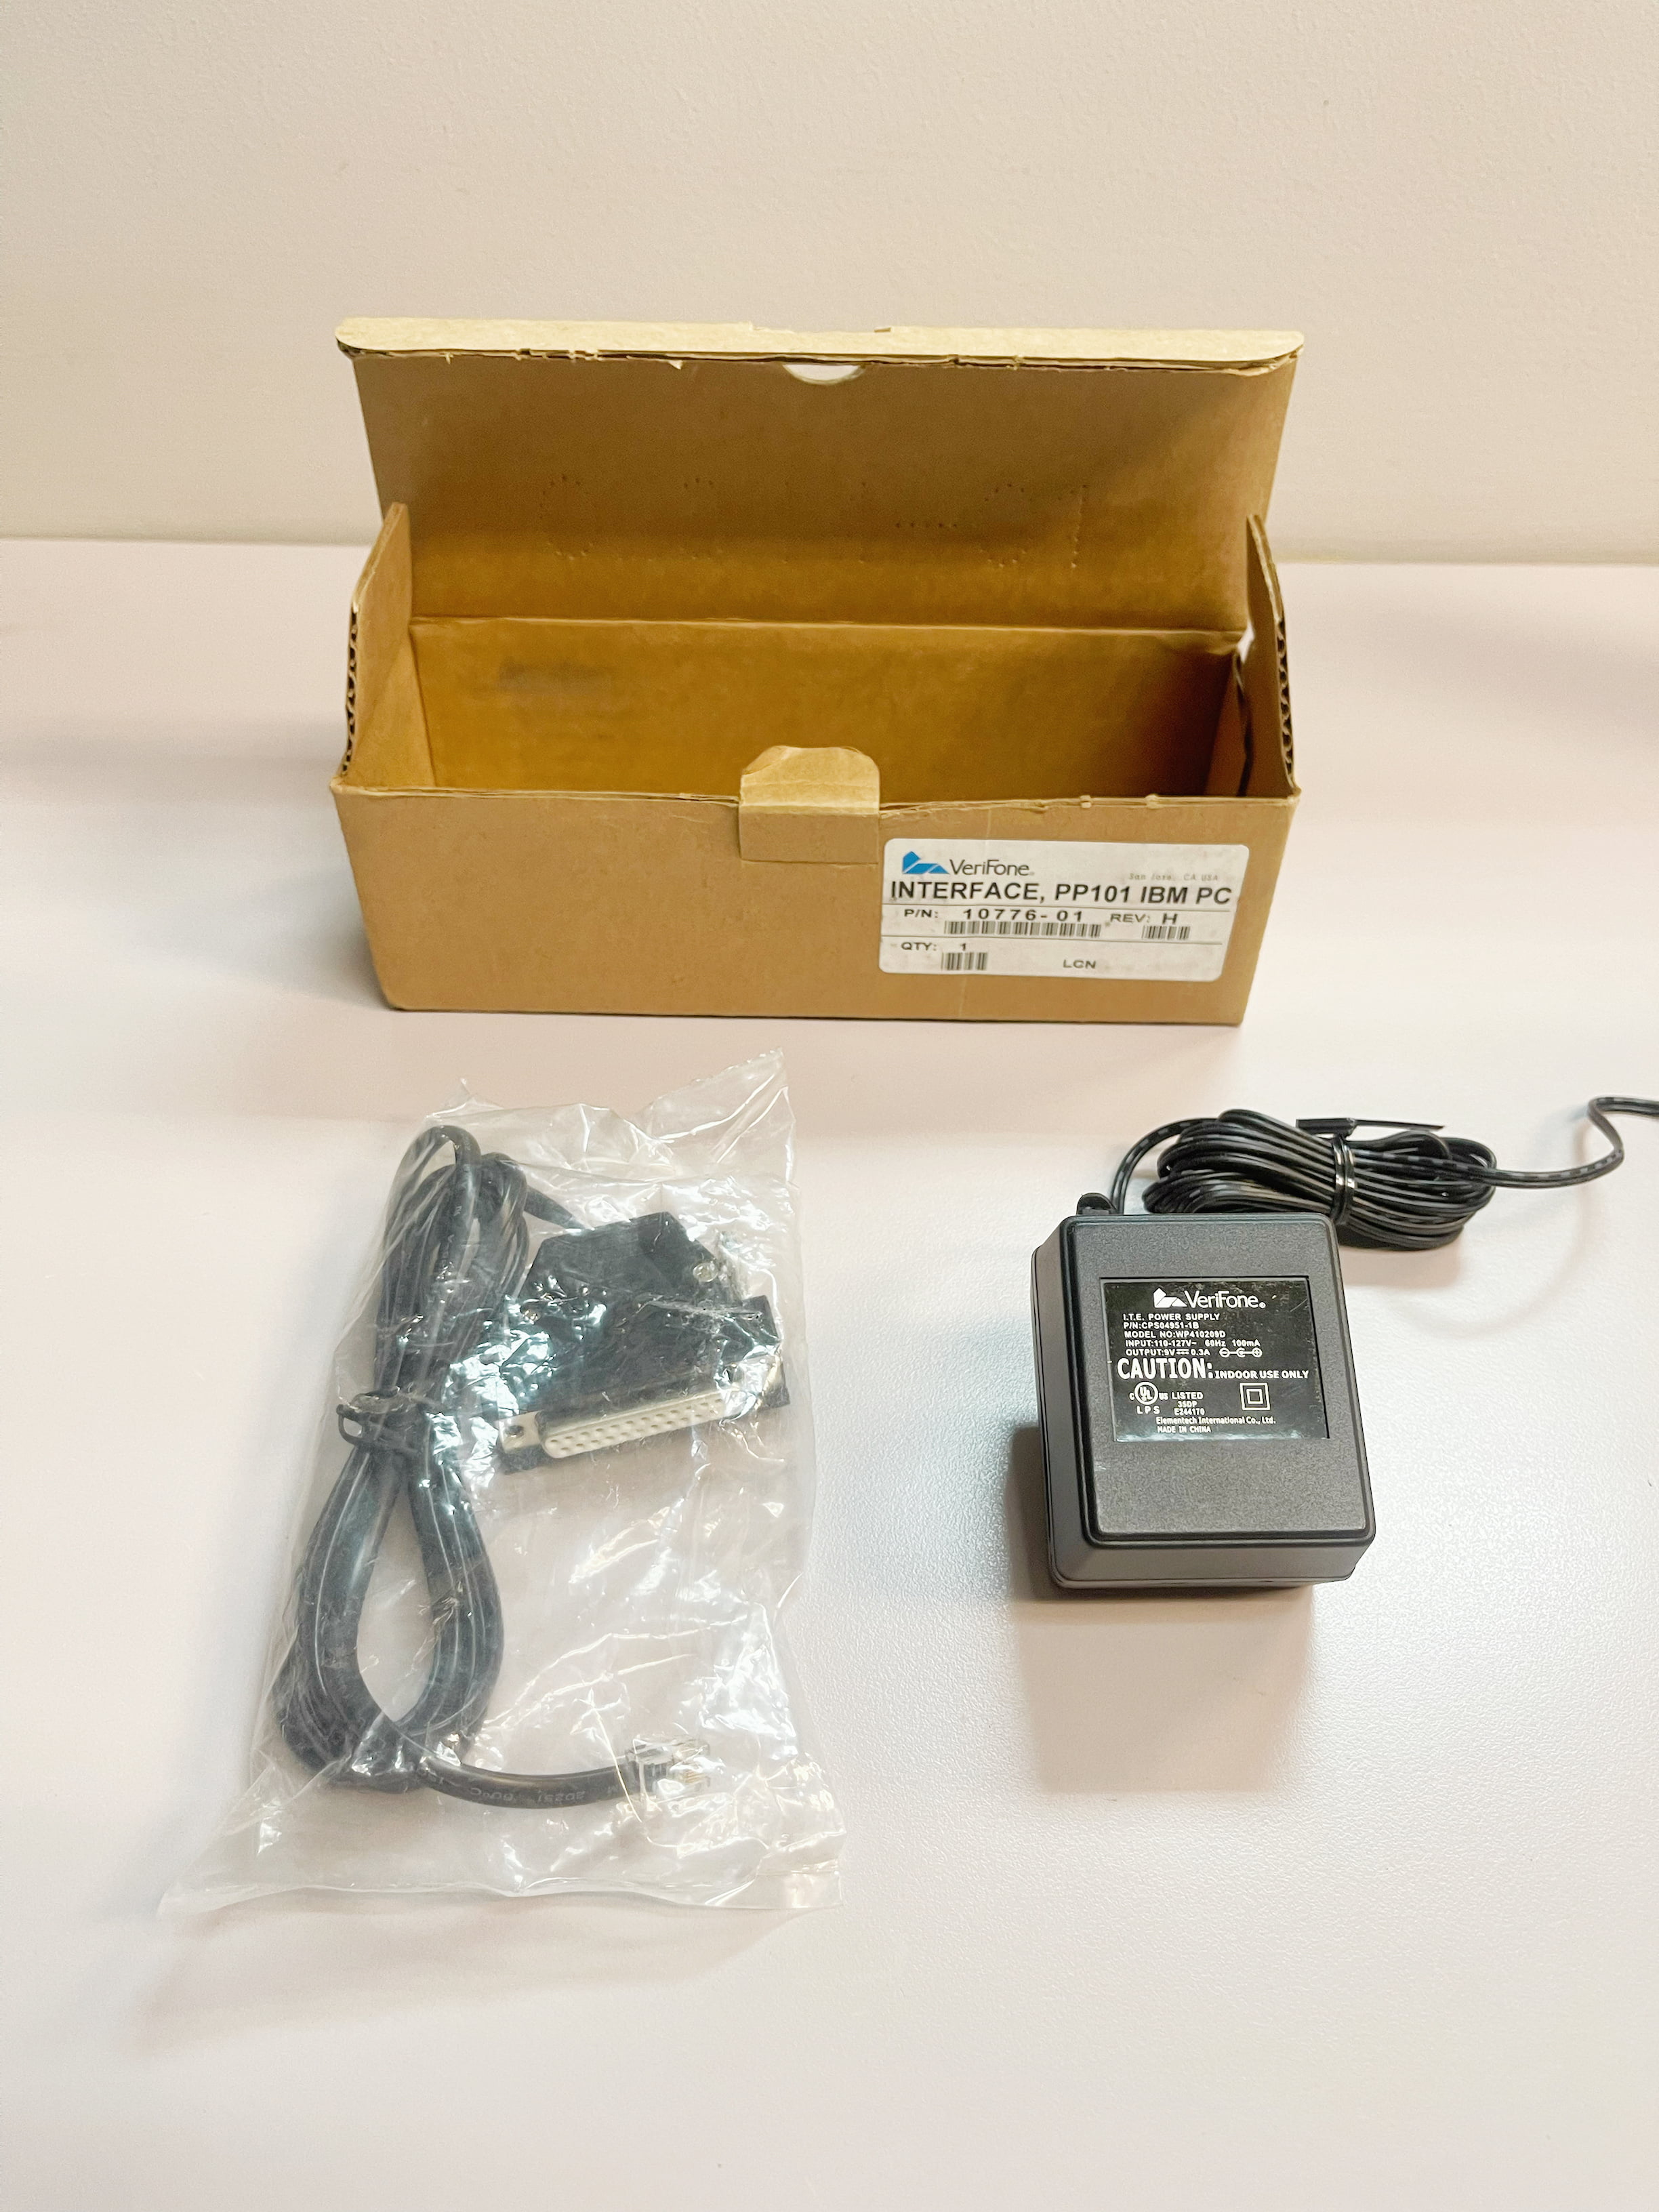 Verifone Interface Pp101 IBM at 10776-02-r G1 for sale online 